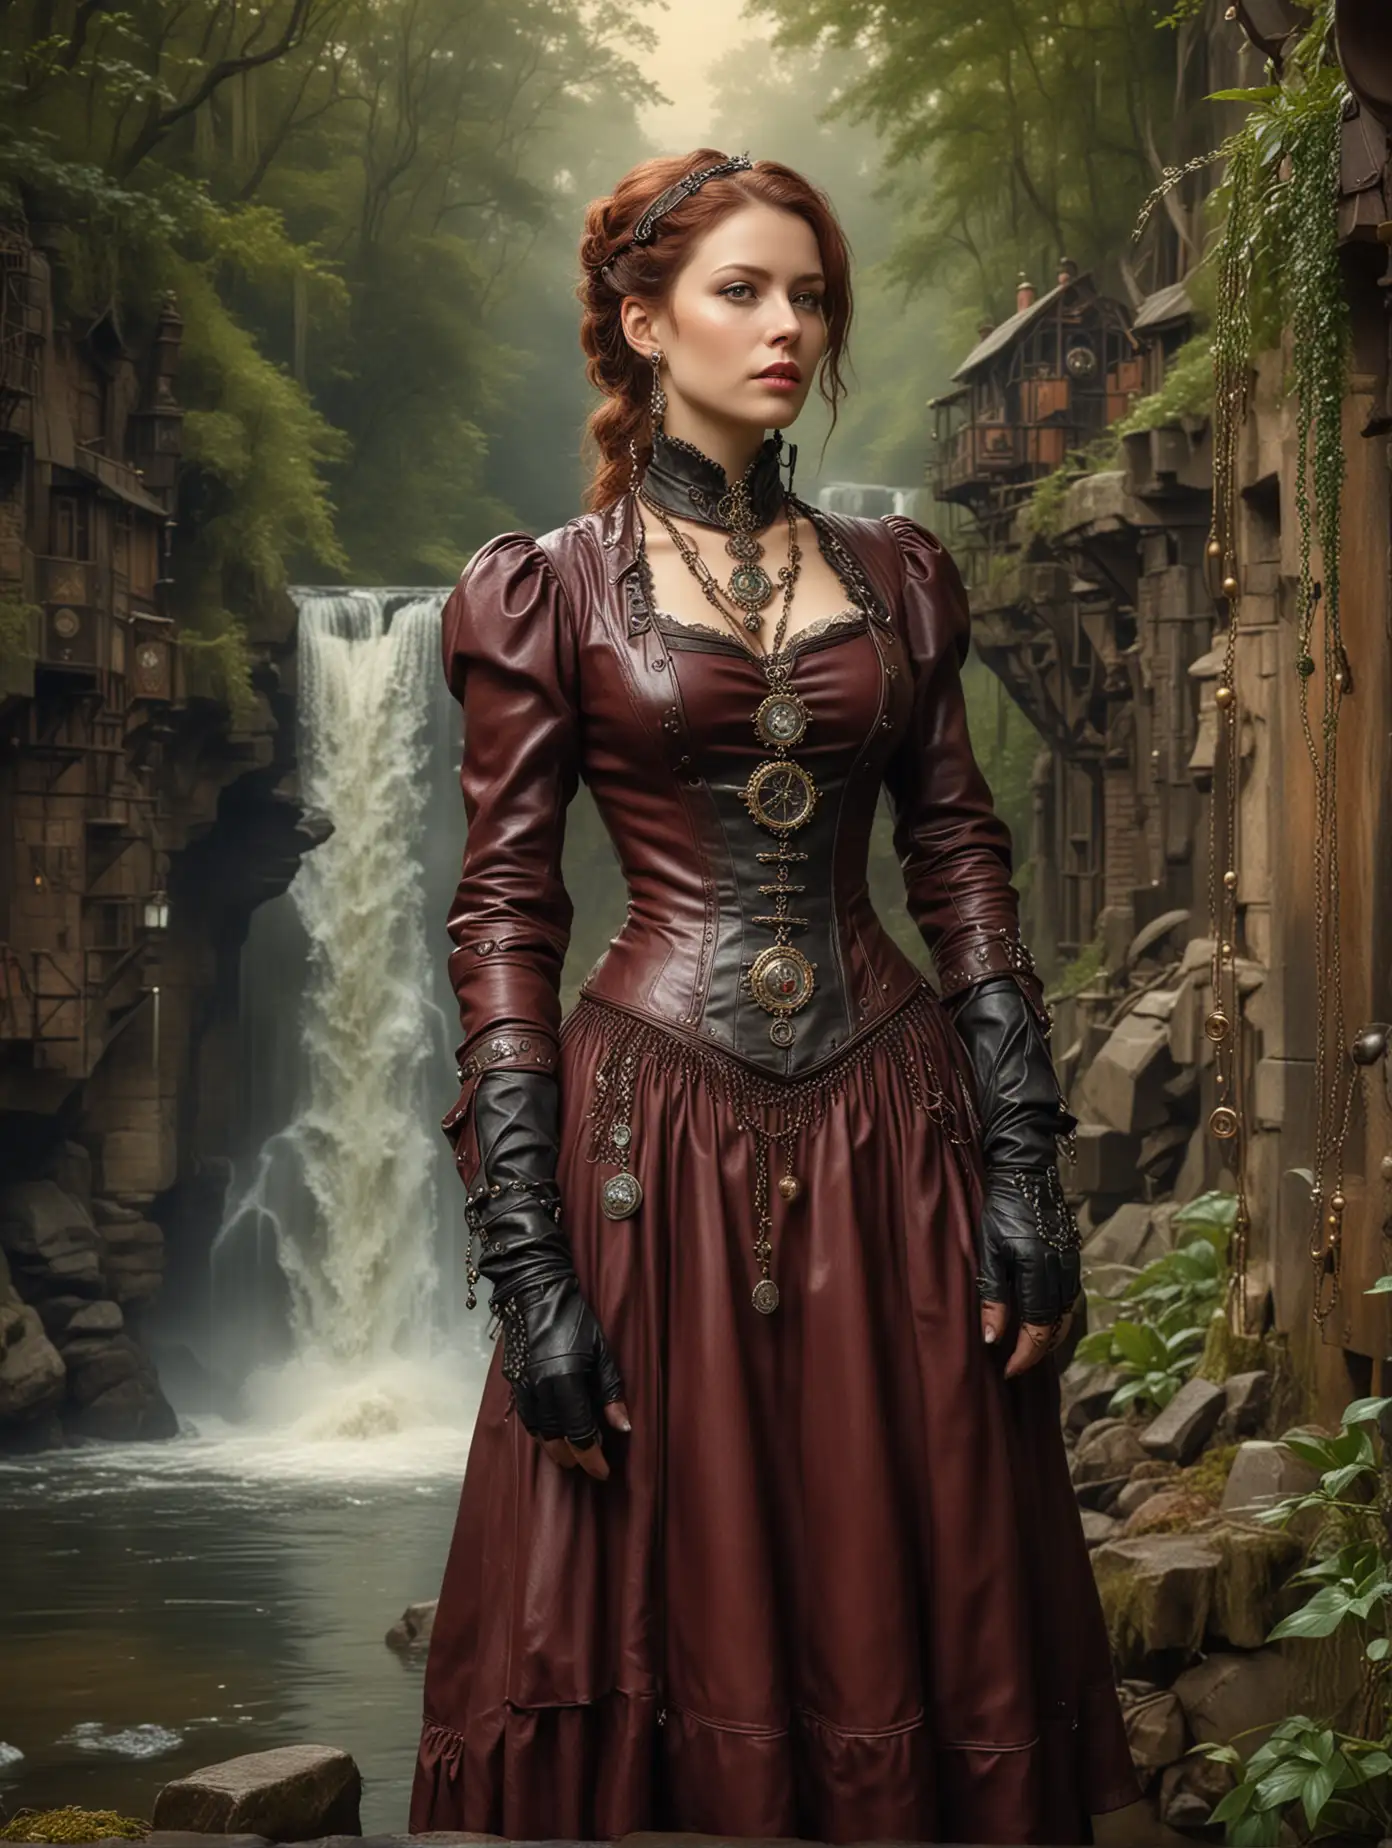 Steampunk Noble Woman in Leather Claret Dress by Waterfall